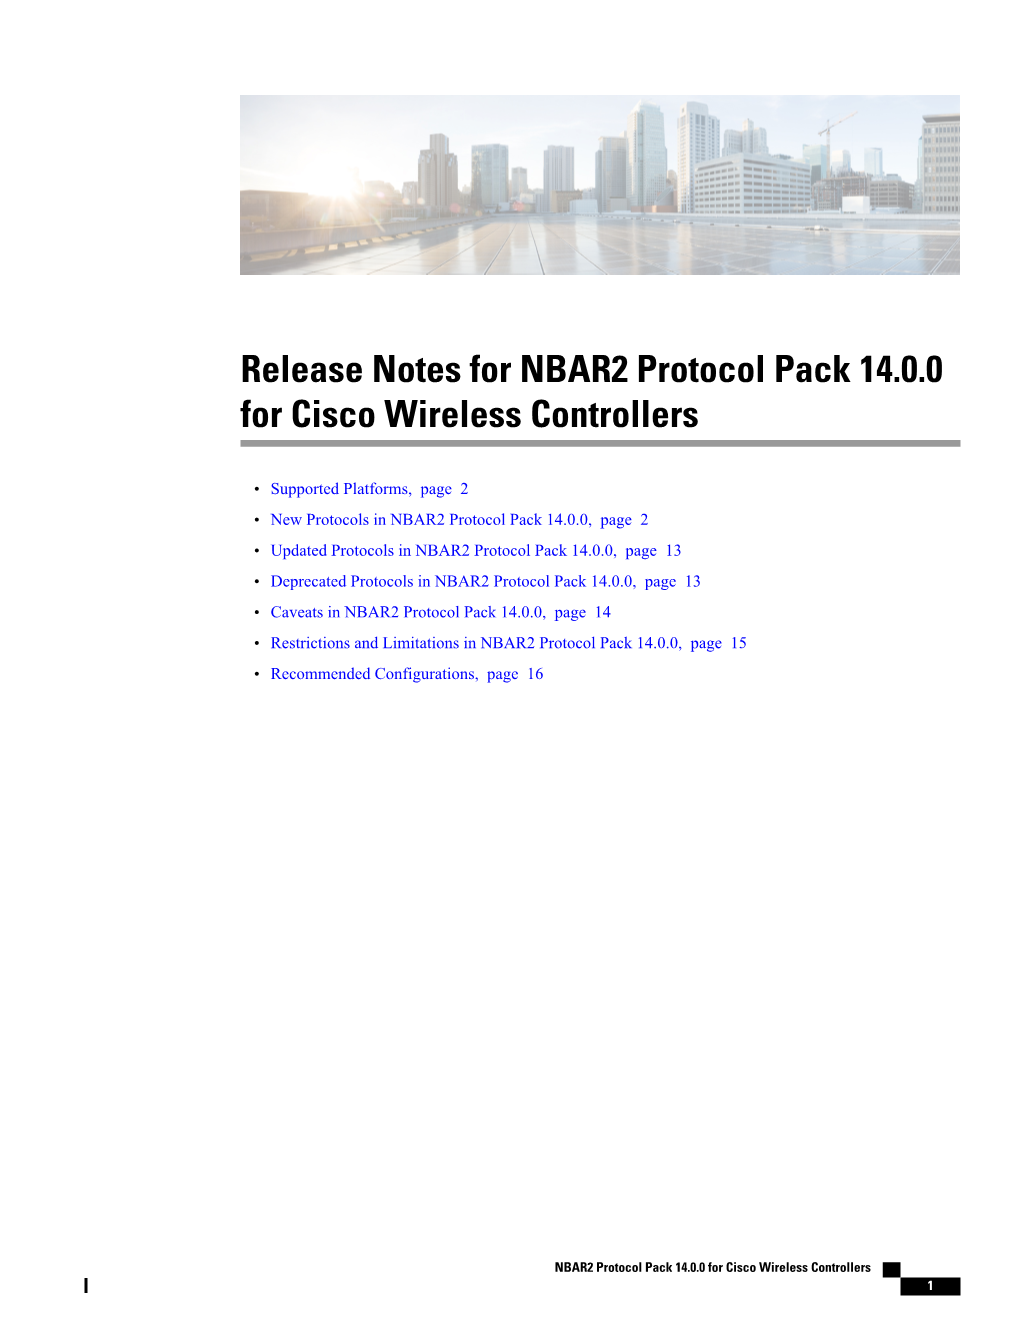 Release Notes for NBAR2 Protocol Pack 14.0.0 for Cisco Wireless Controllers